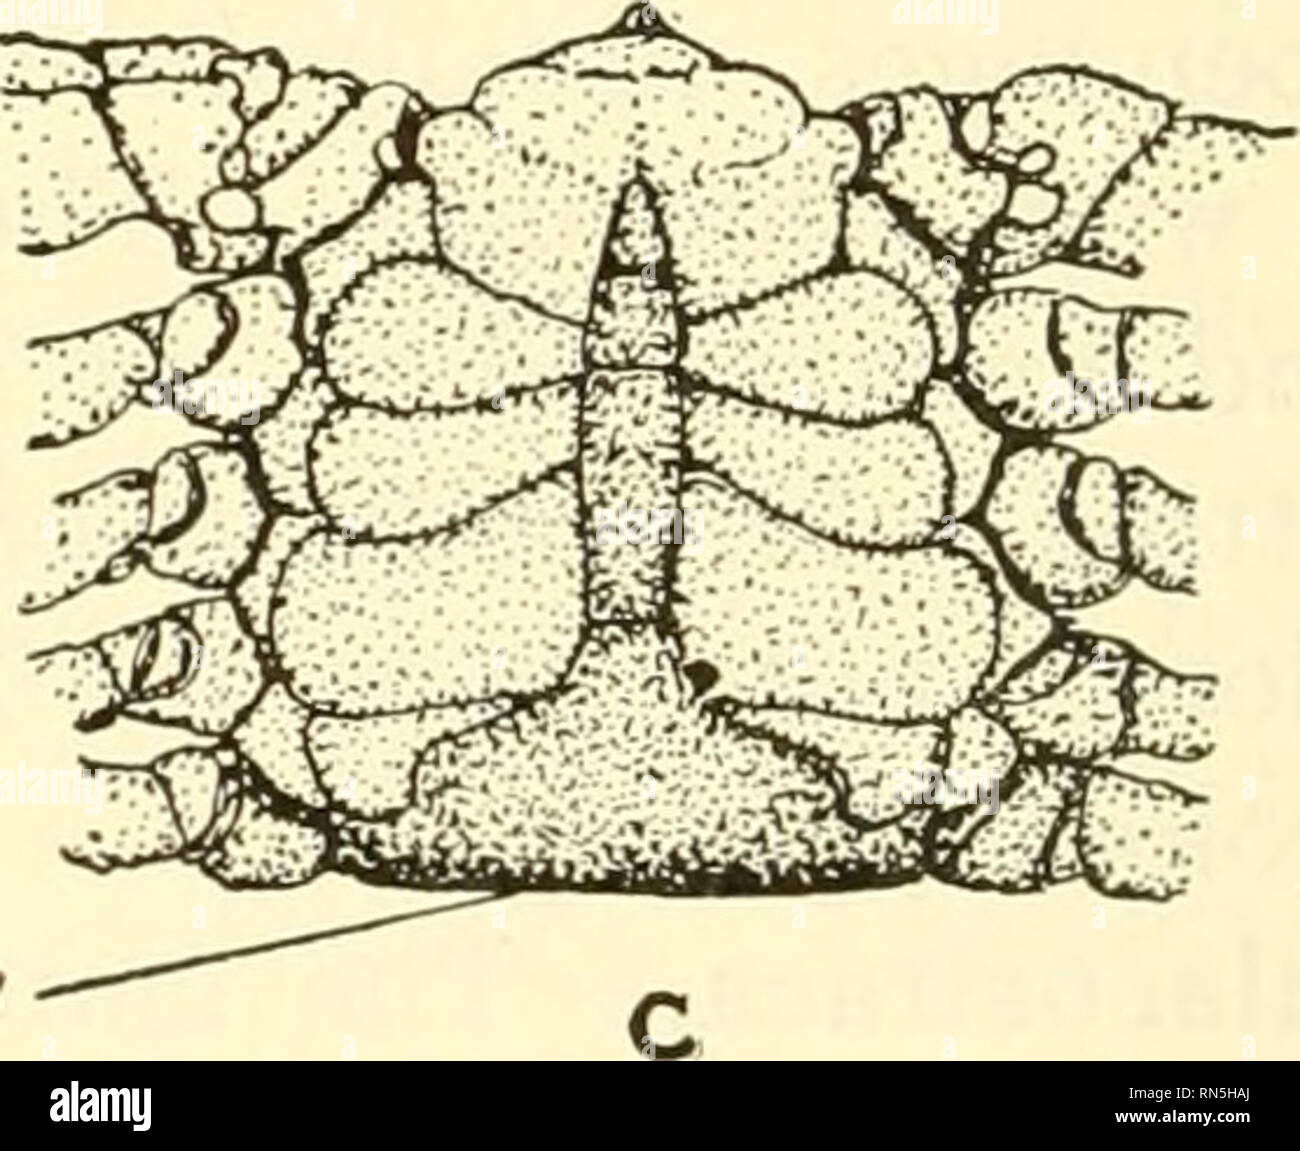 . Animal biology. Zoology; Biology. Abdomen Fig. 169.—The blue or edible crab of the Atlantic coast, Callinectes sapidus Rathbun. From preserved specimens. A, upper surface. X 3^. B, under surface of female to show breadth of abdominal metameres between which and the thorax the eggs are carried, attached to the swimmerets. X M- C, under surface of body of male to show the narrowness of abdominal metameres. X M- first glance appear to be unnaturally active snails, but which on examina- tion prove to be snail shells containing young hermit crabs. Sometimes these snail shells also bear other anim Stock Photo